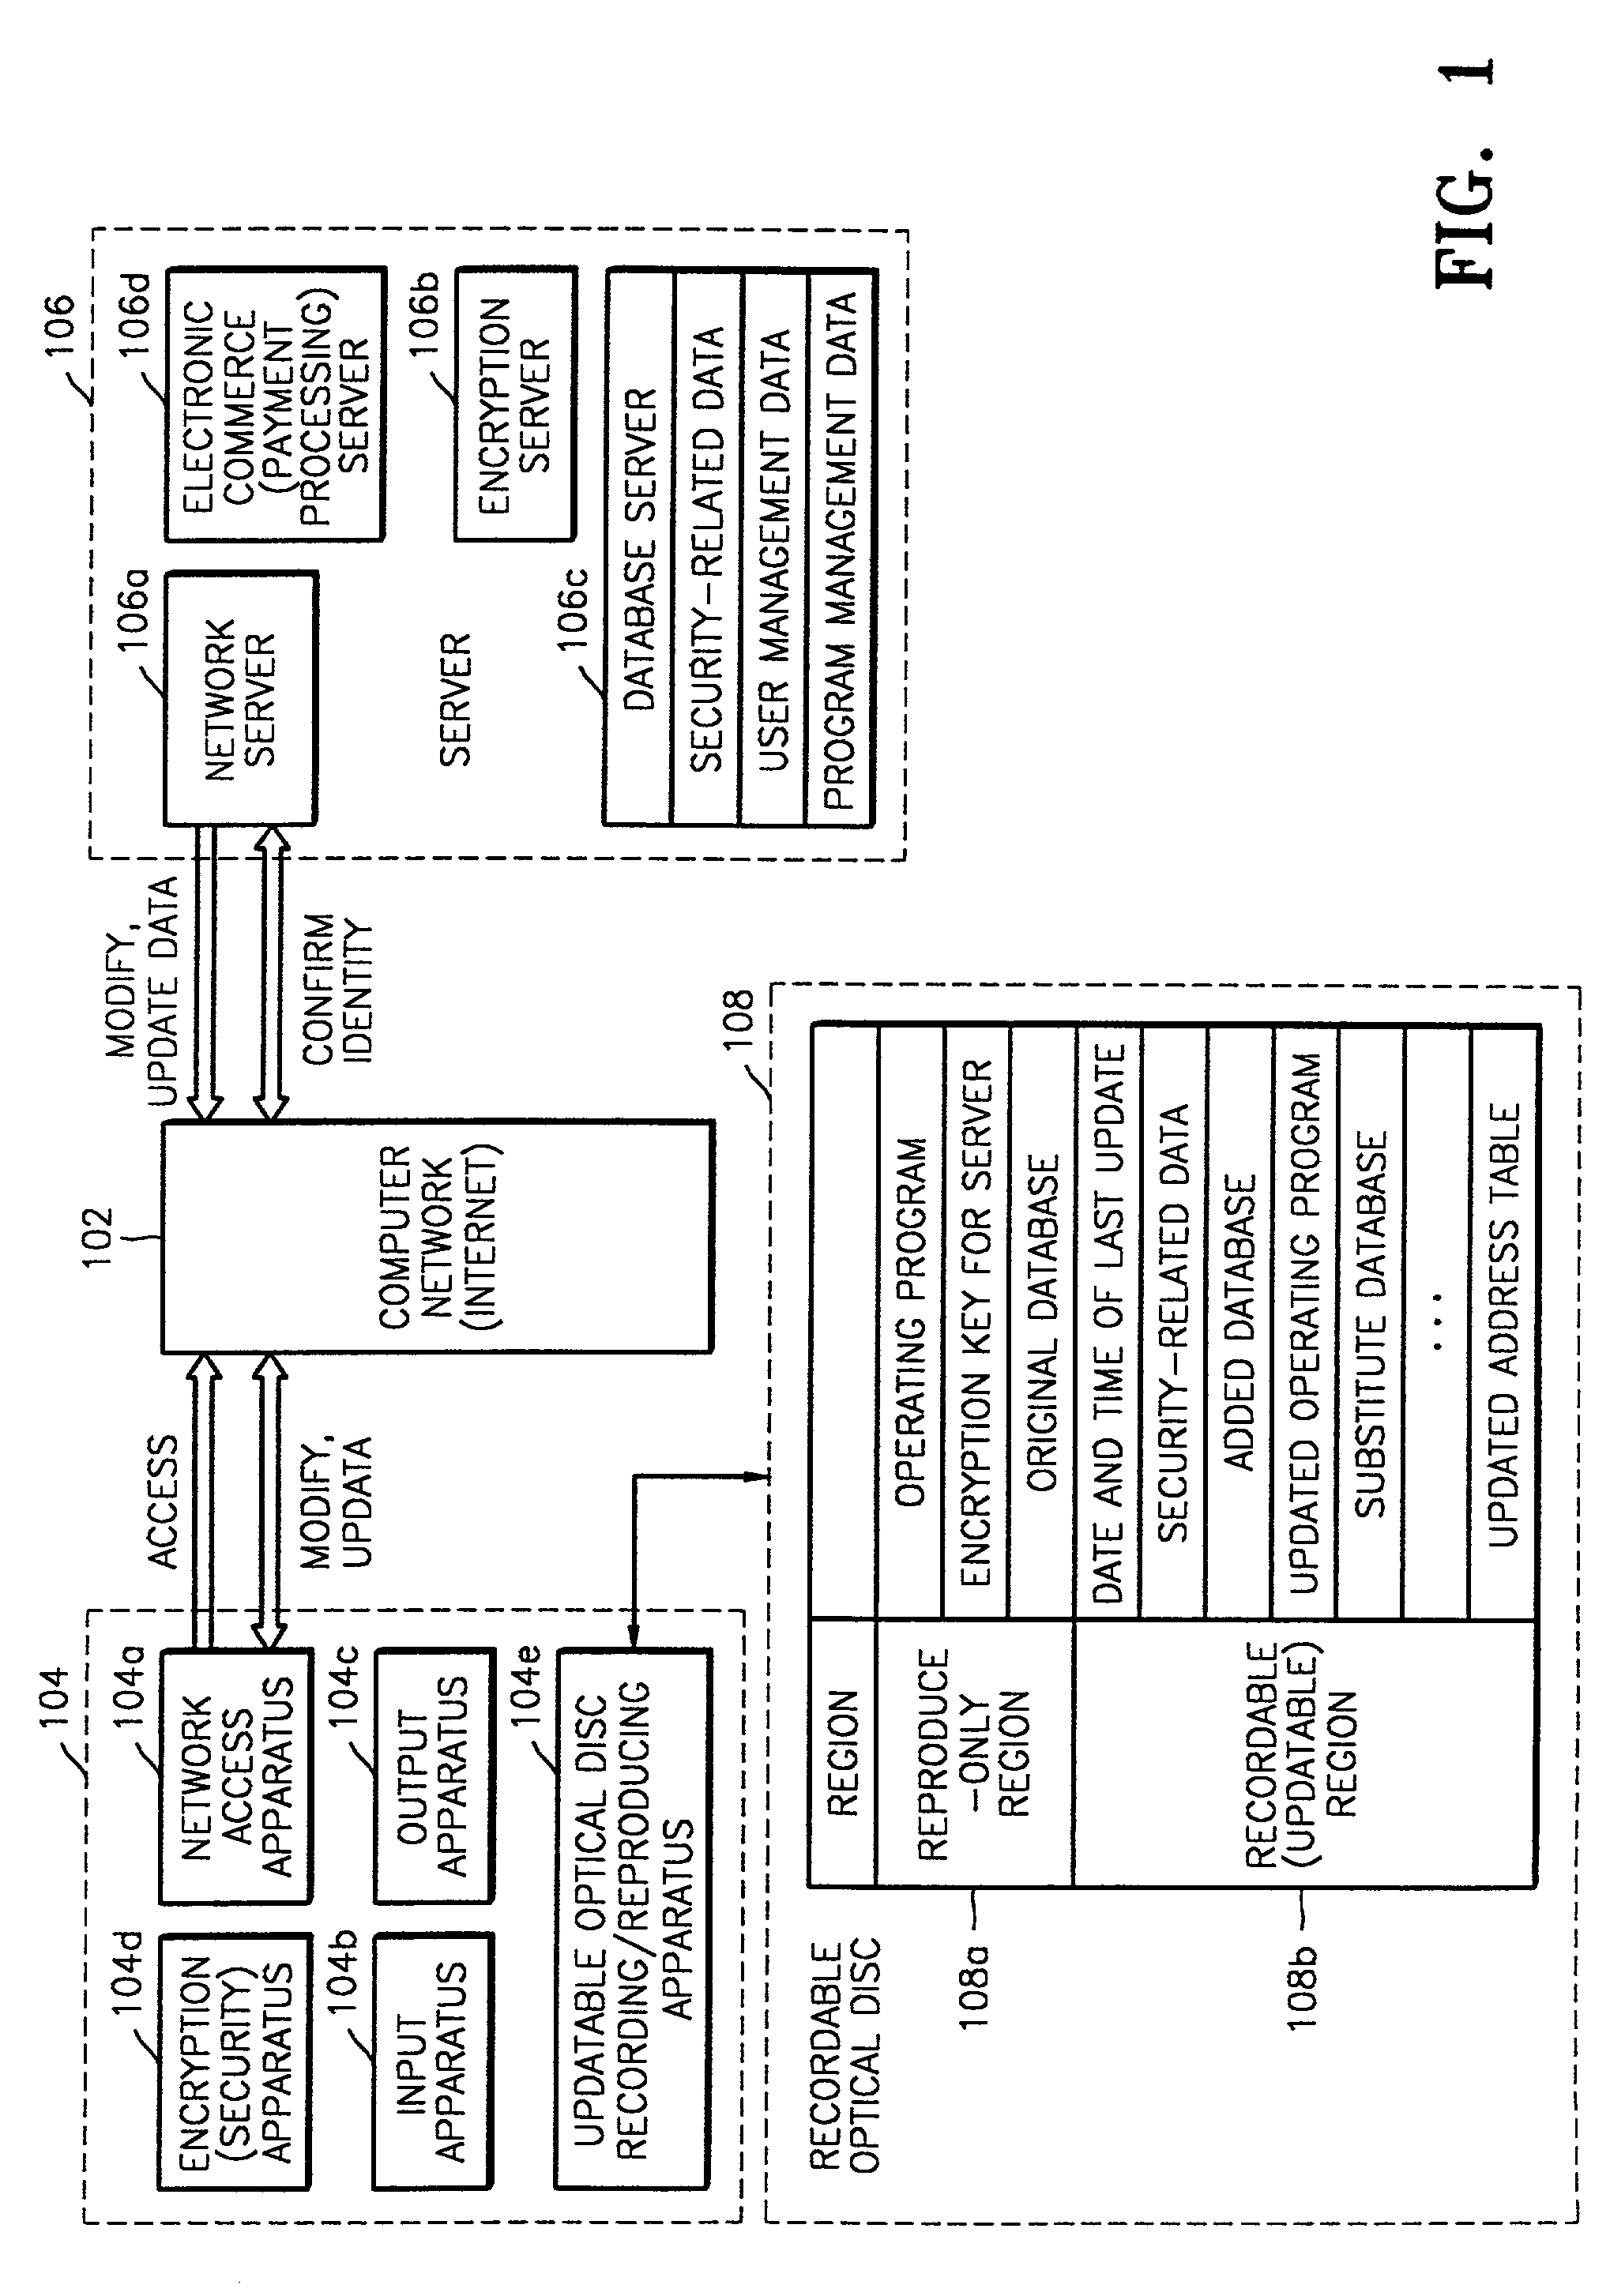 Method of and apparatus for updating a database using a recordable optical disc